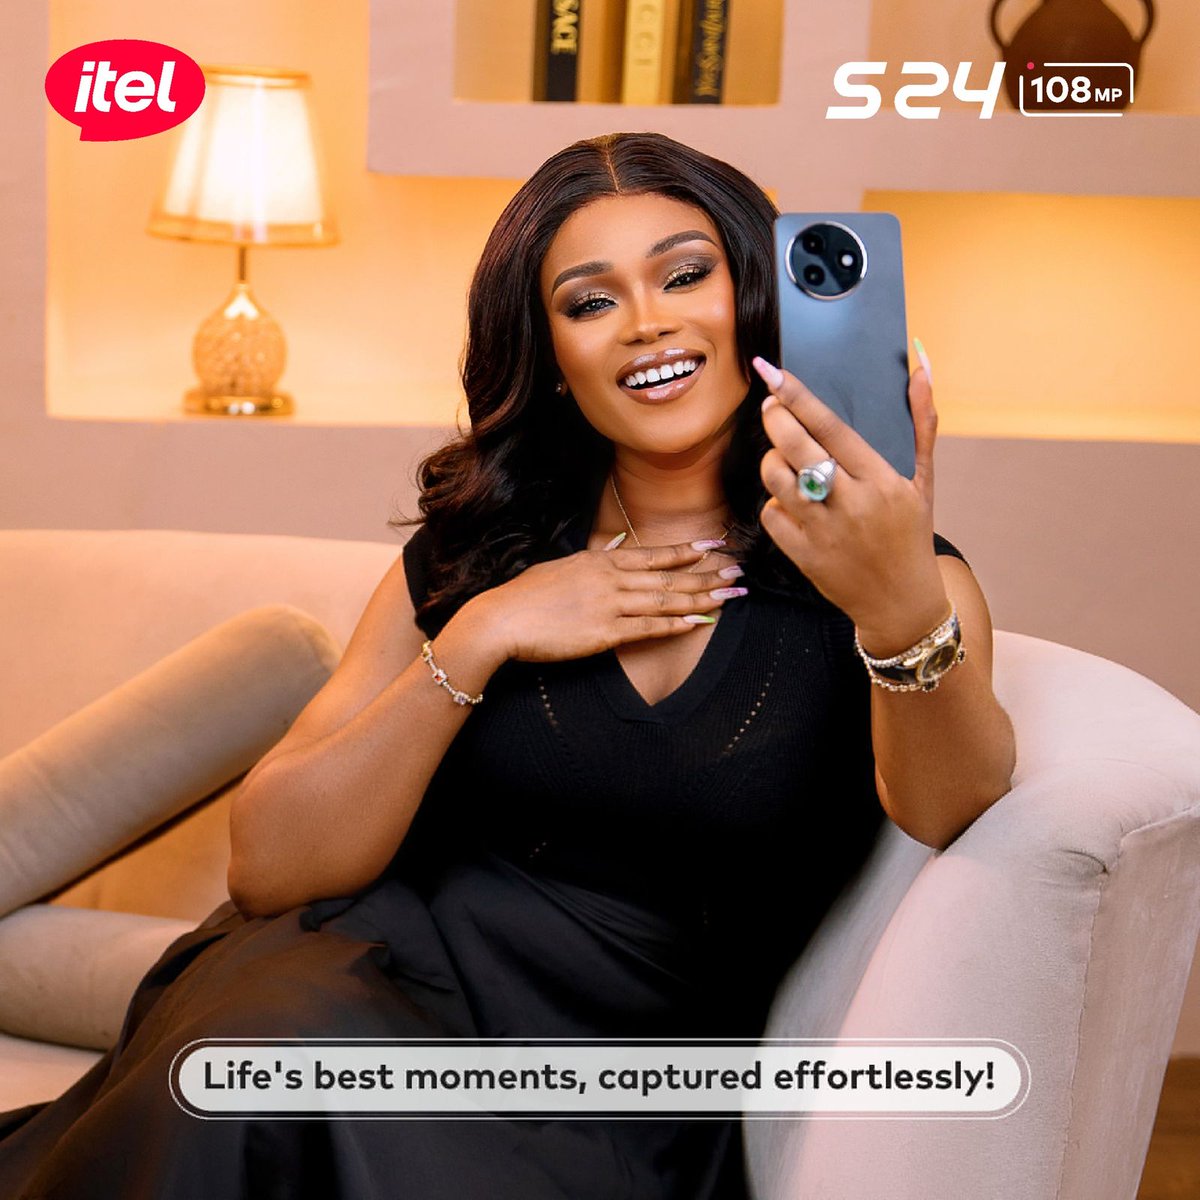 Make sure to seize life's finest moments with the incredible 108MP camera featured in the itel S24! Don't wait, grab your itel S24 from Jumia today and start capturing memories in style! Order now at <jumia.com.ng/itel-ng-cod/>! #itelS24 #108MPCameraInYourPocket